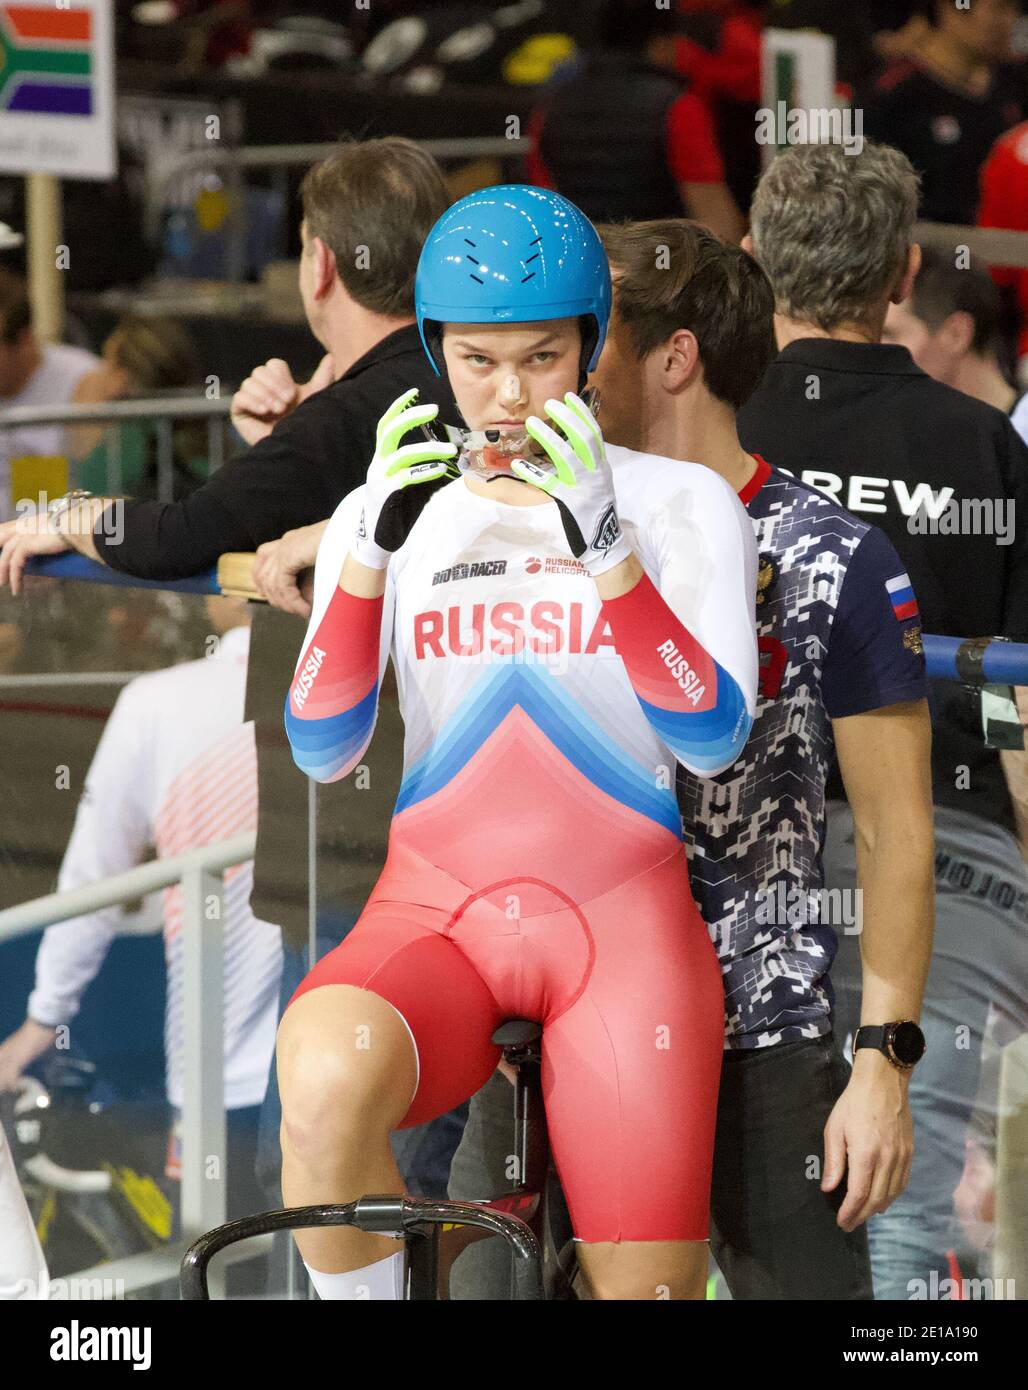 https://c8.alamy.com/comp/2E1A190/anastasia-voinova-from-russia-during-the-2018-uci-track-cycling-world-championships-in-apeldoorn-the-netherlands-2E1A190.jpg